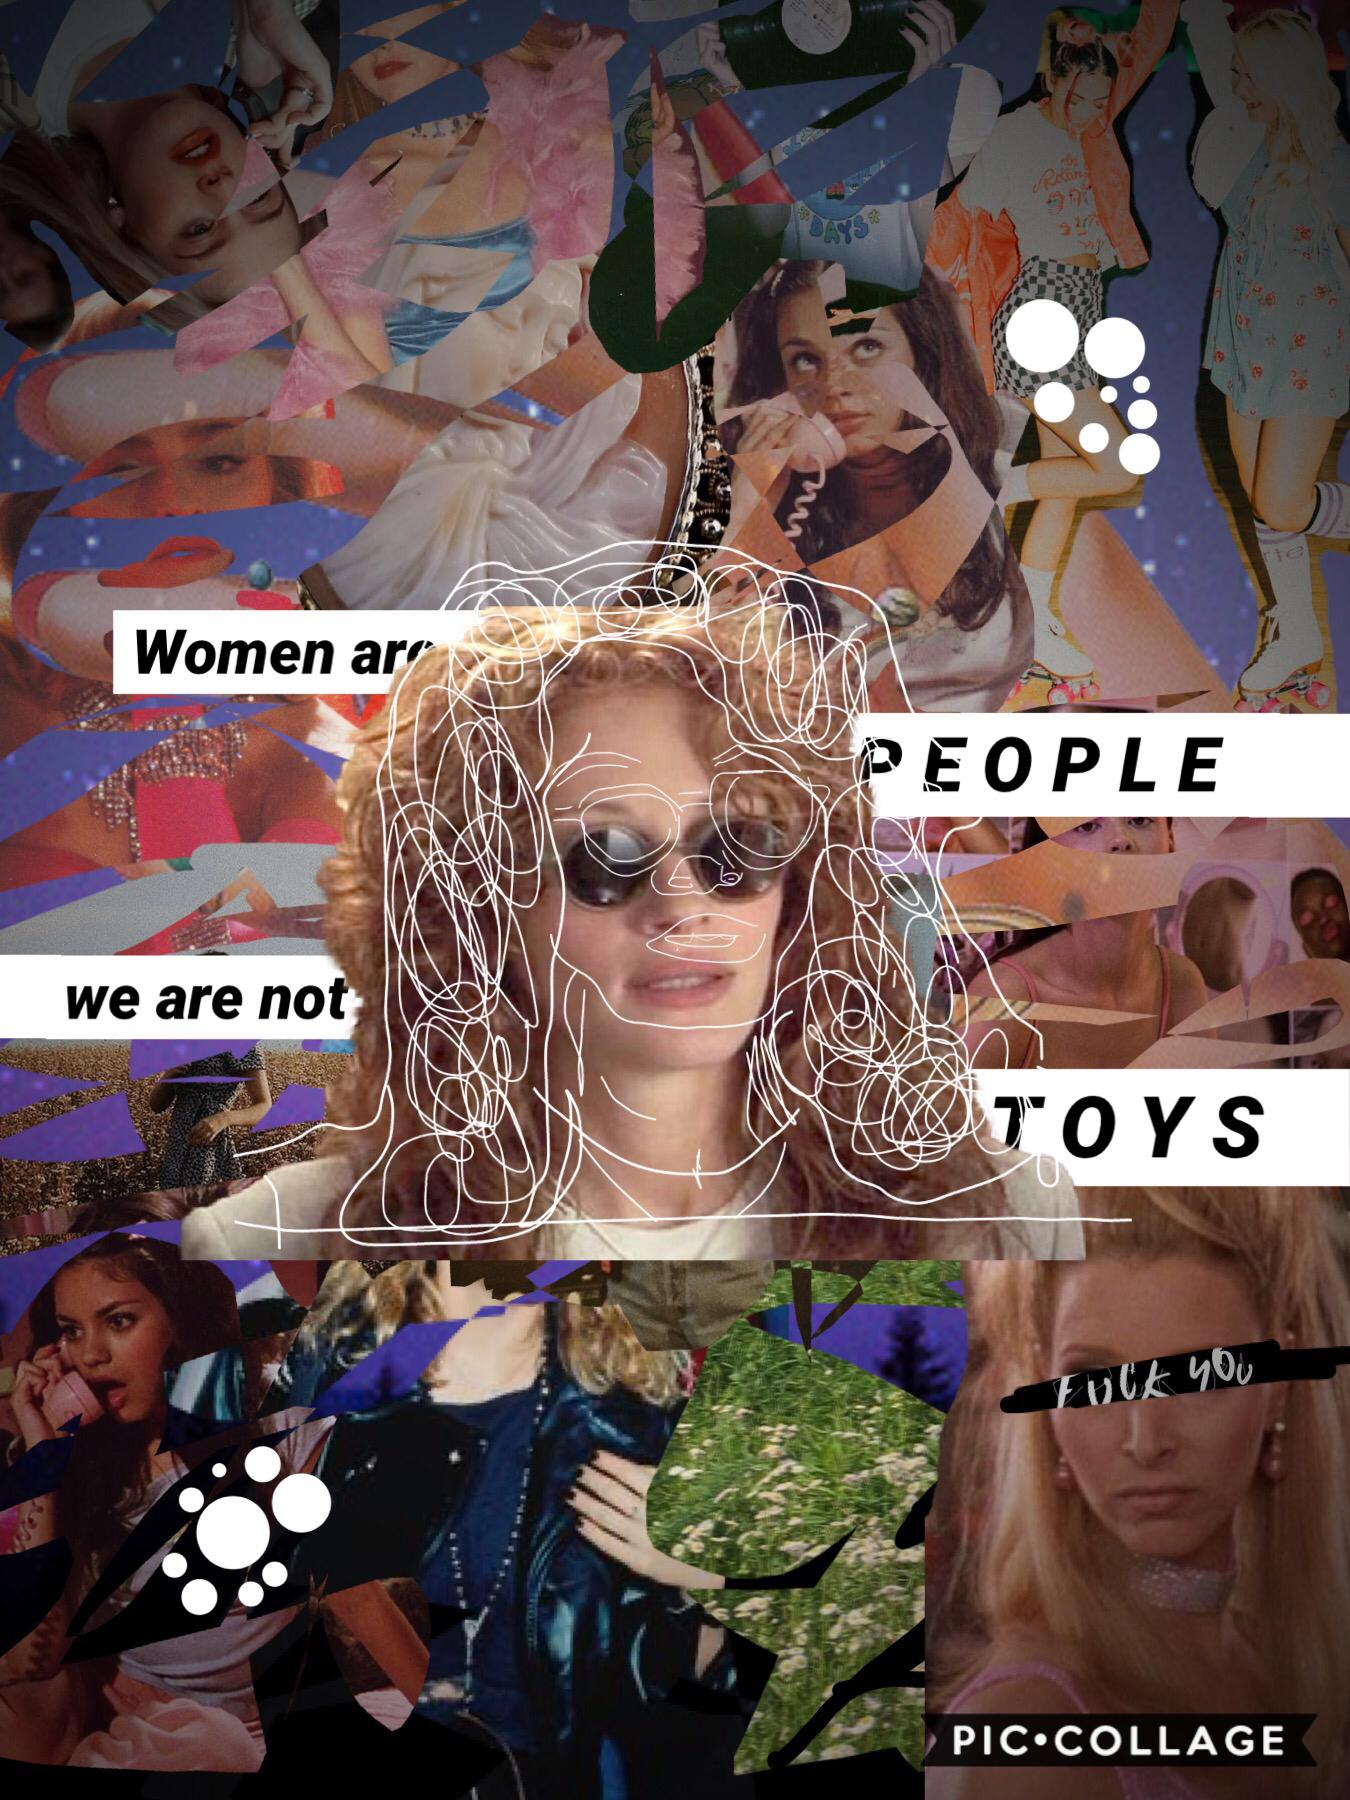 Tap
🦑this collage is weird🦑
I cut up lots of girls and it turns out it’s cool? The message is so powerful ✊, I guess? 